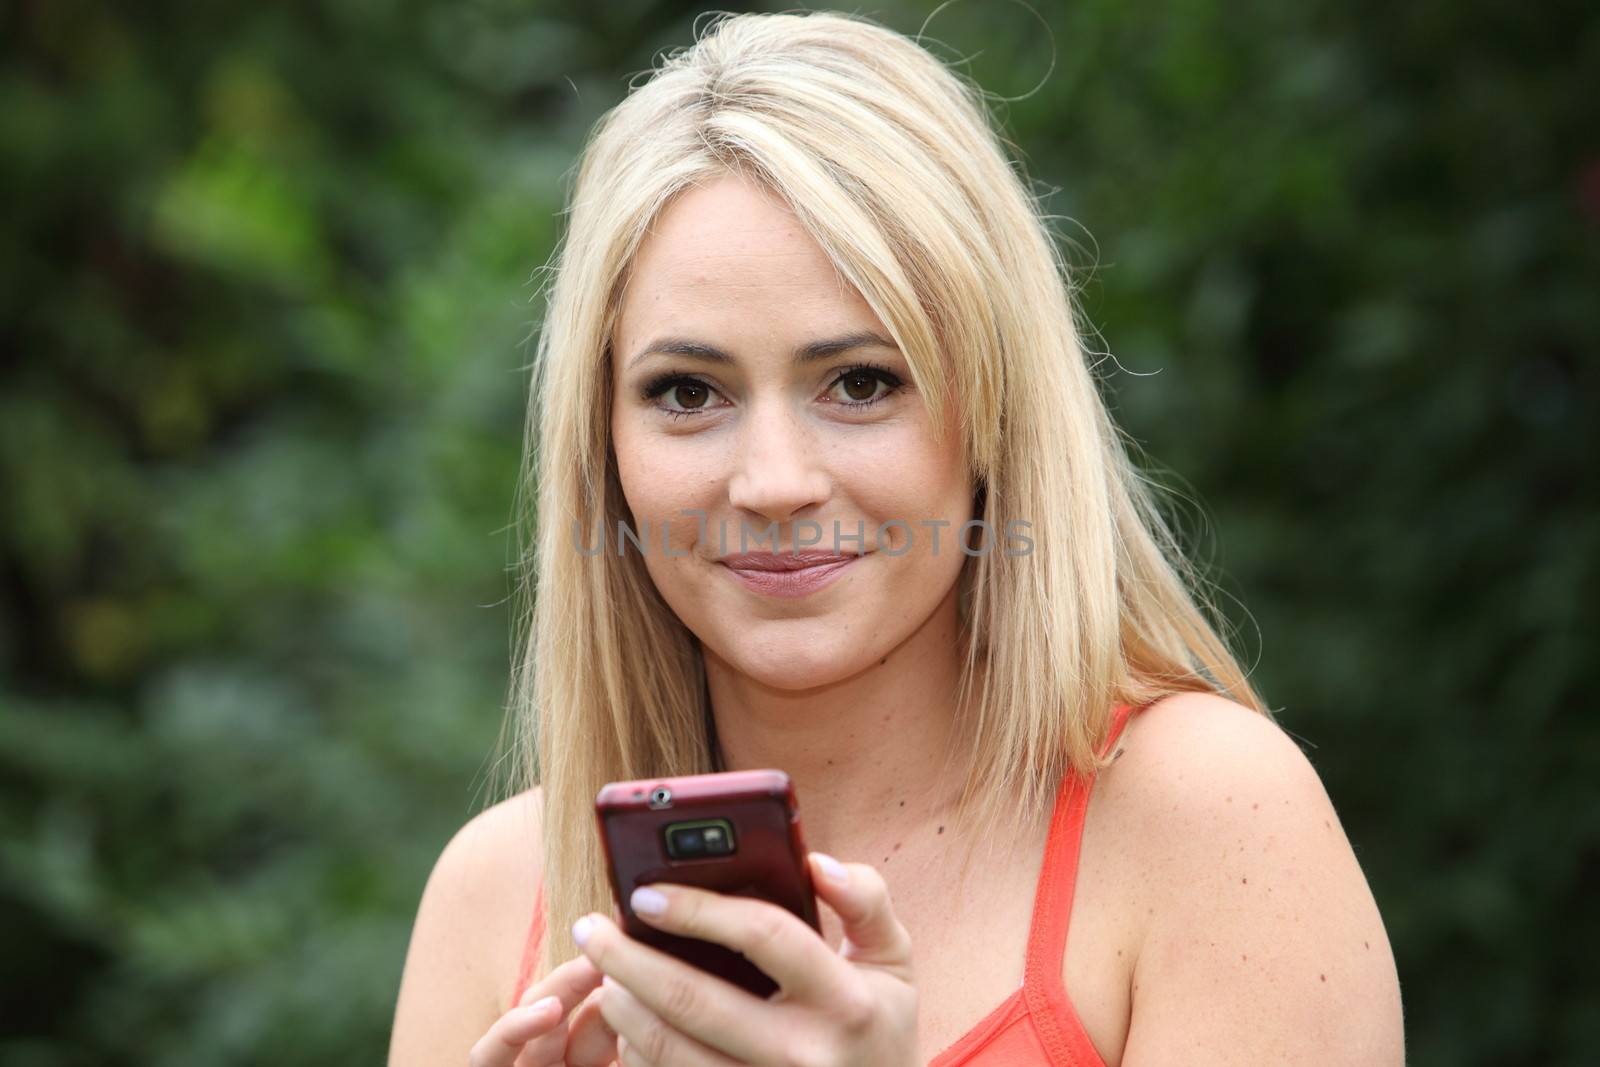 Smiling blond woman in a summer top standing in a green garden with a mobile phone in her hands looking at the camera